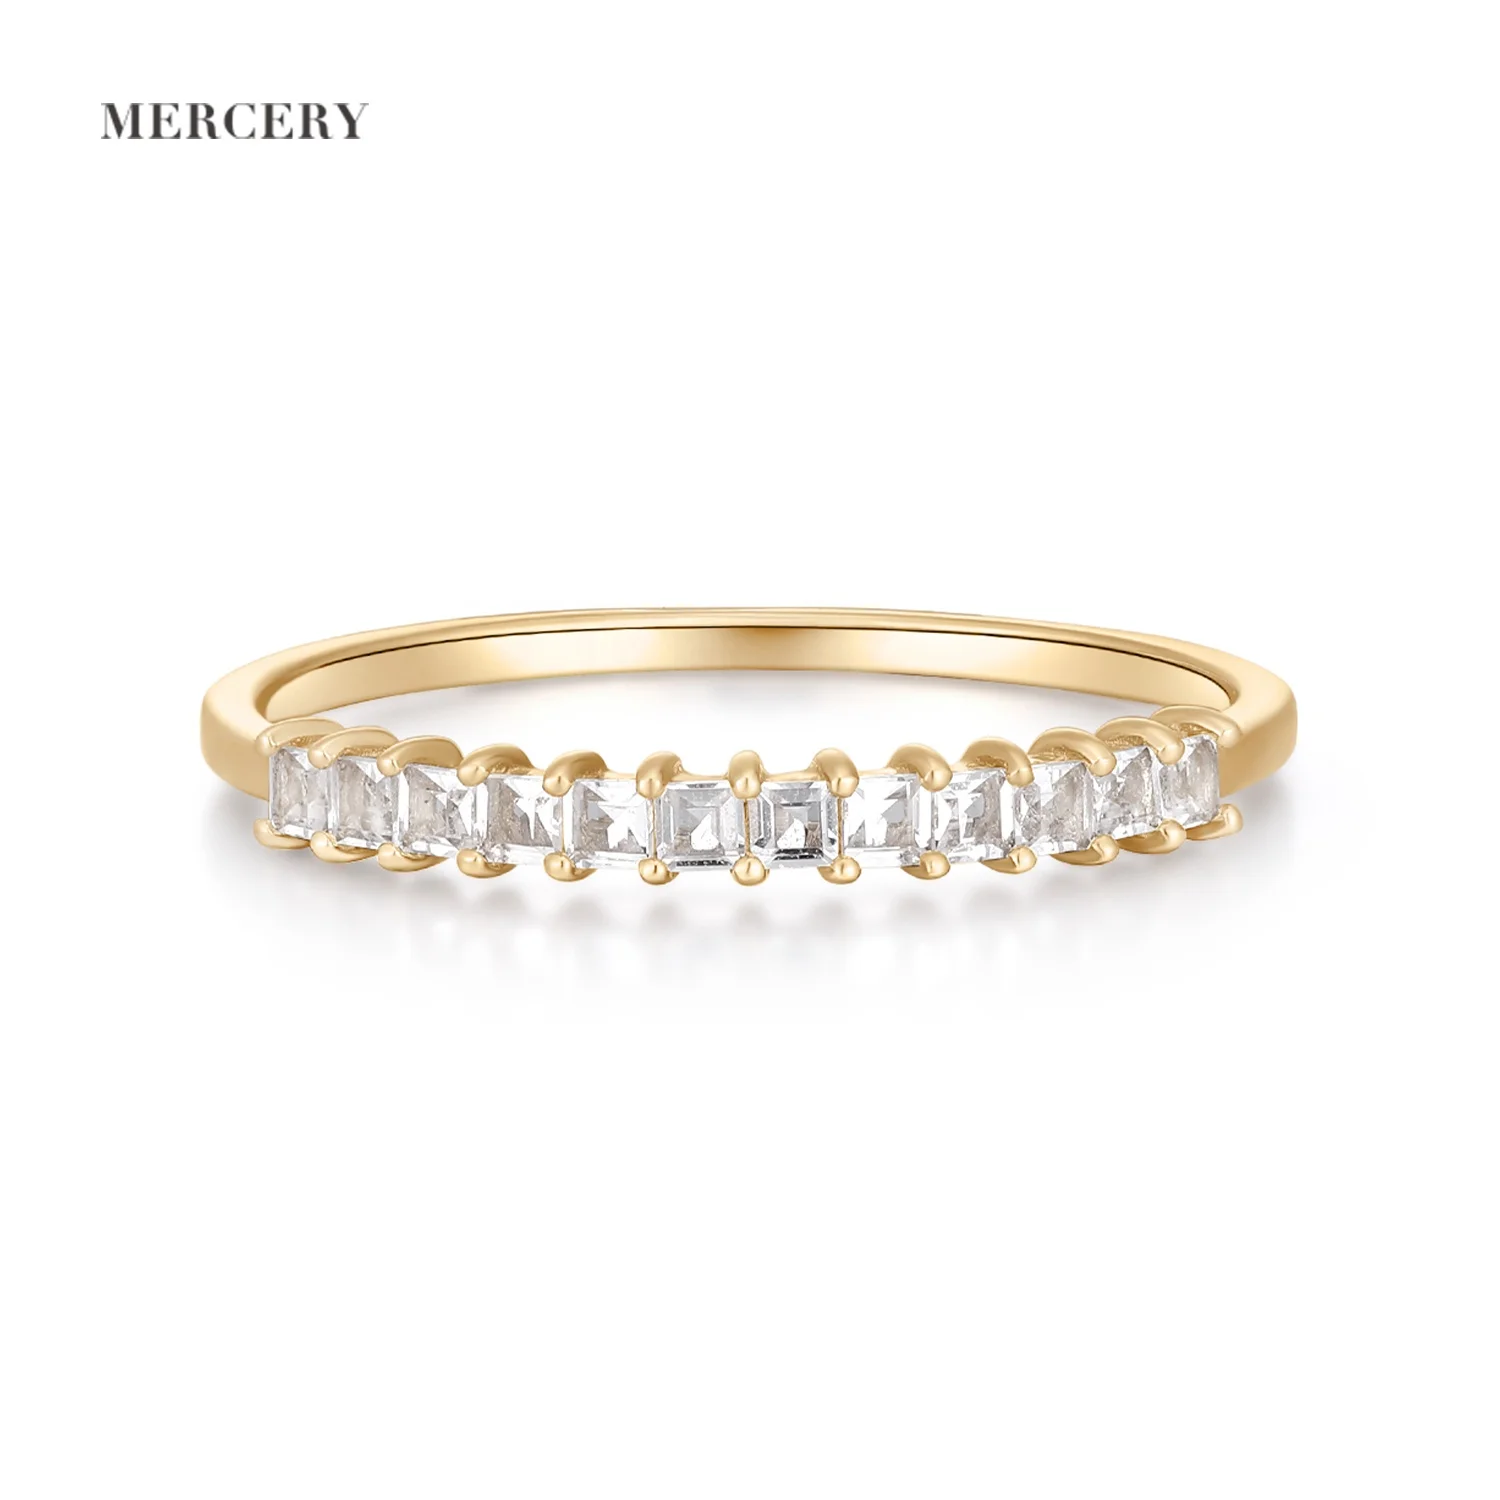 

Mercery Dainty Luxury Jewelry White Topaz Ring Jewelry Natural Gemstone Ring 14k Solid Gold Ring For Women